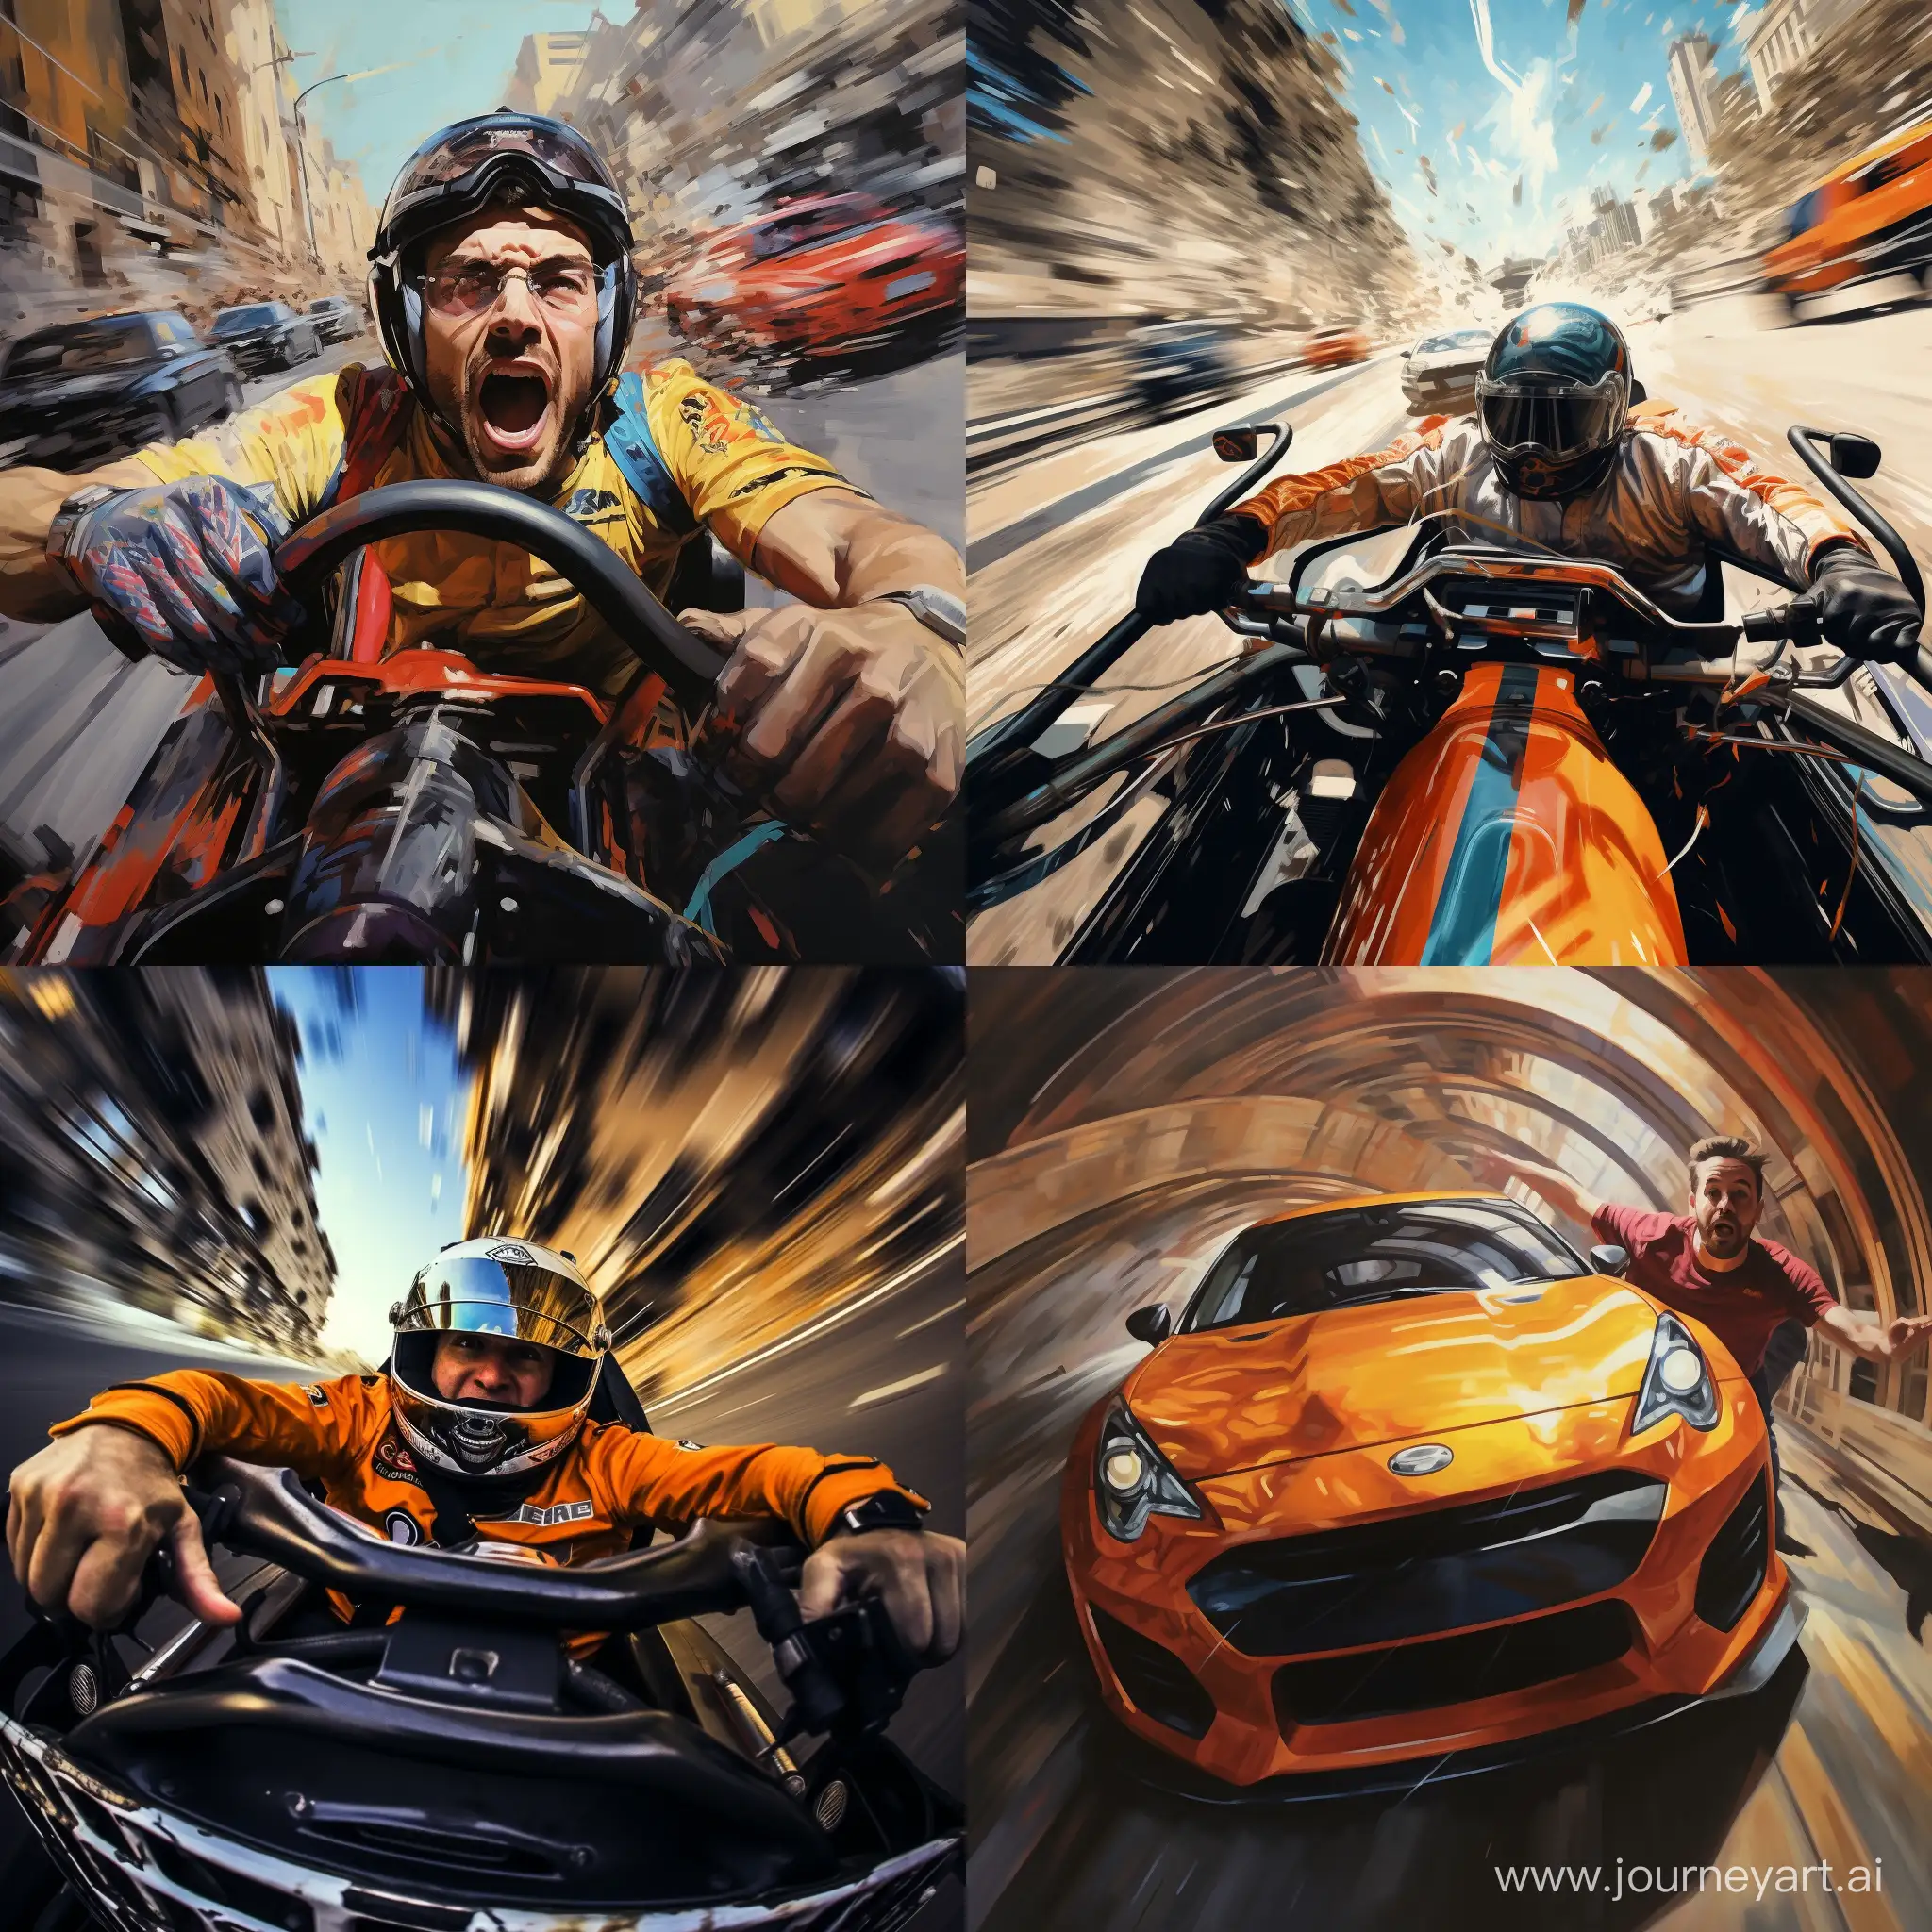 The adrenaline rush of a car racing directly towards the viewer; utilizing foreshortening for impact